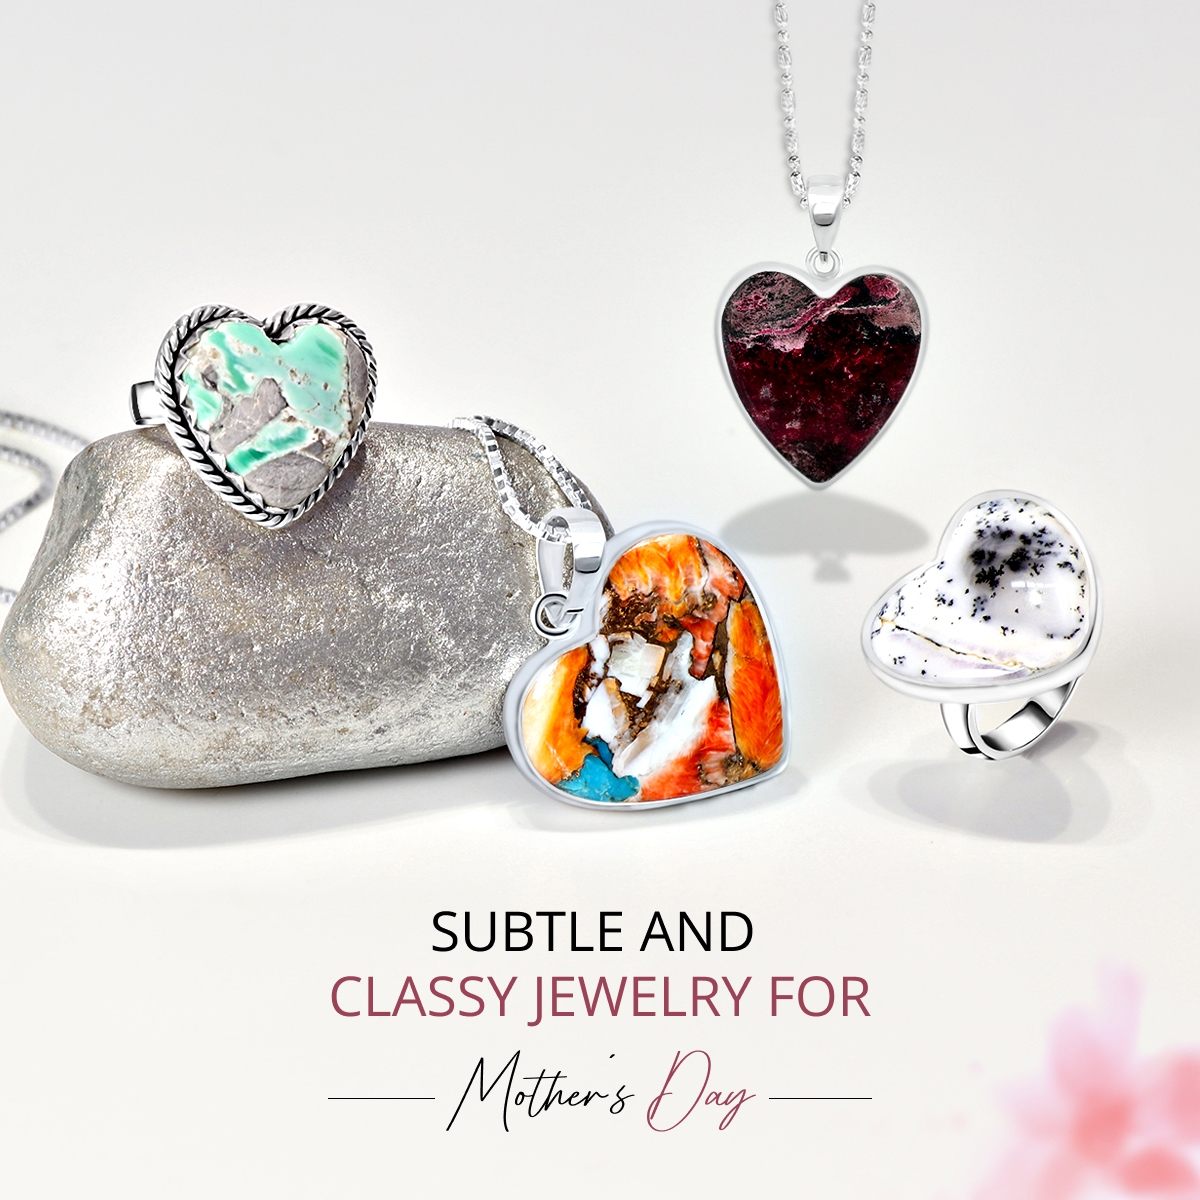 Subtle And Classy Jewelry for Mother's Day